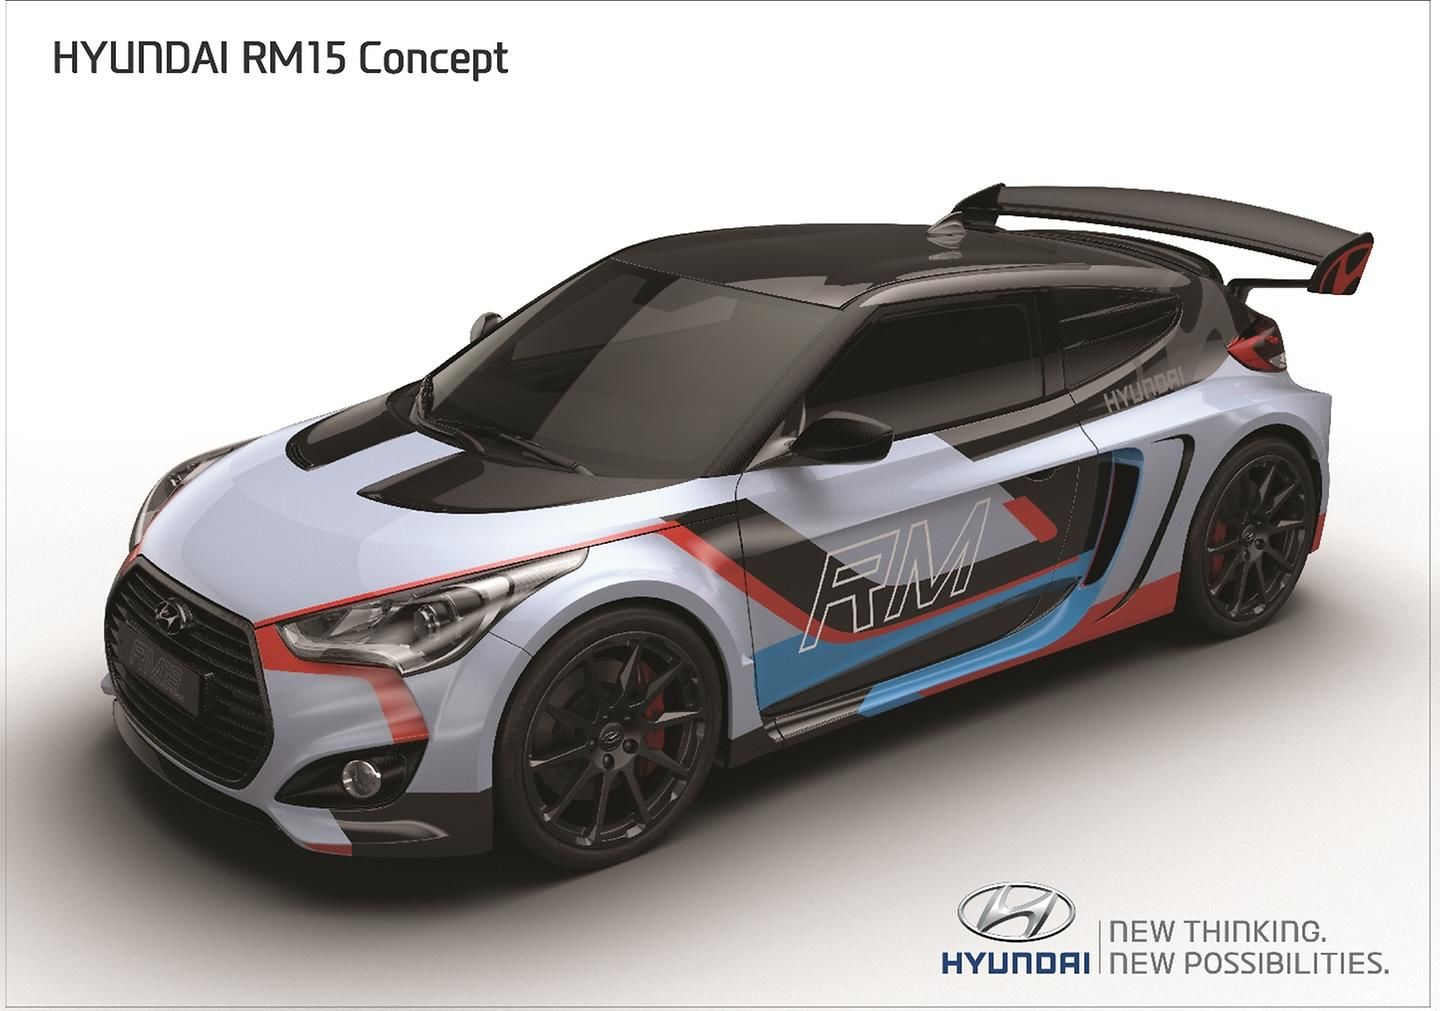 Hyundai Motor's Mid-engined Coupe Concept 'RM15' Revealed at 2015 Seoul Motor Show (2)